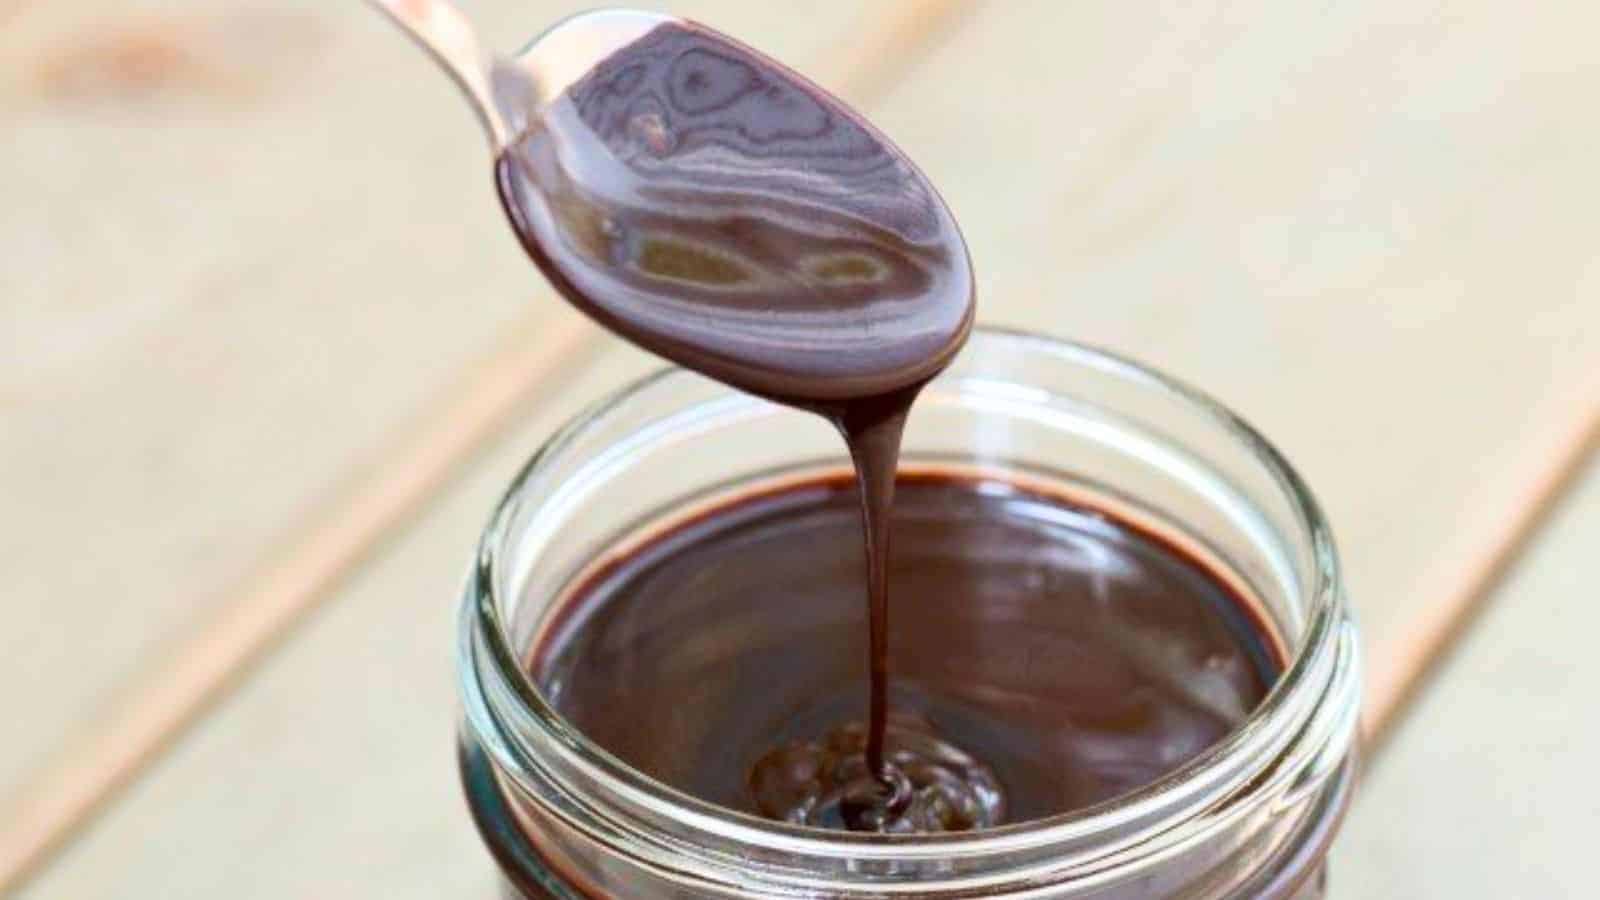 Image shows a spoon drizzling homemade espresso hot fudge sauce back into its jar.